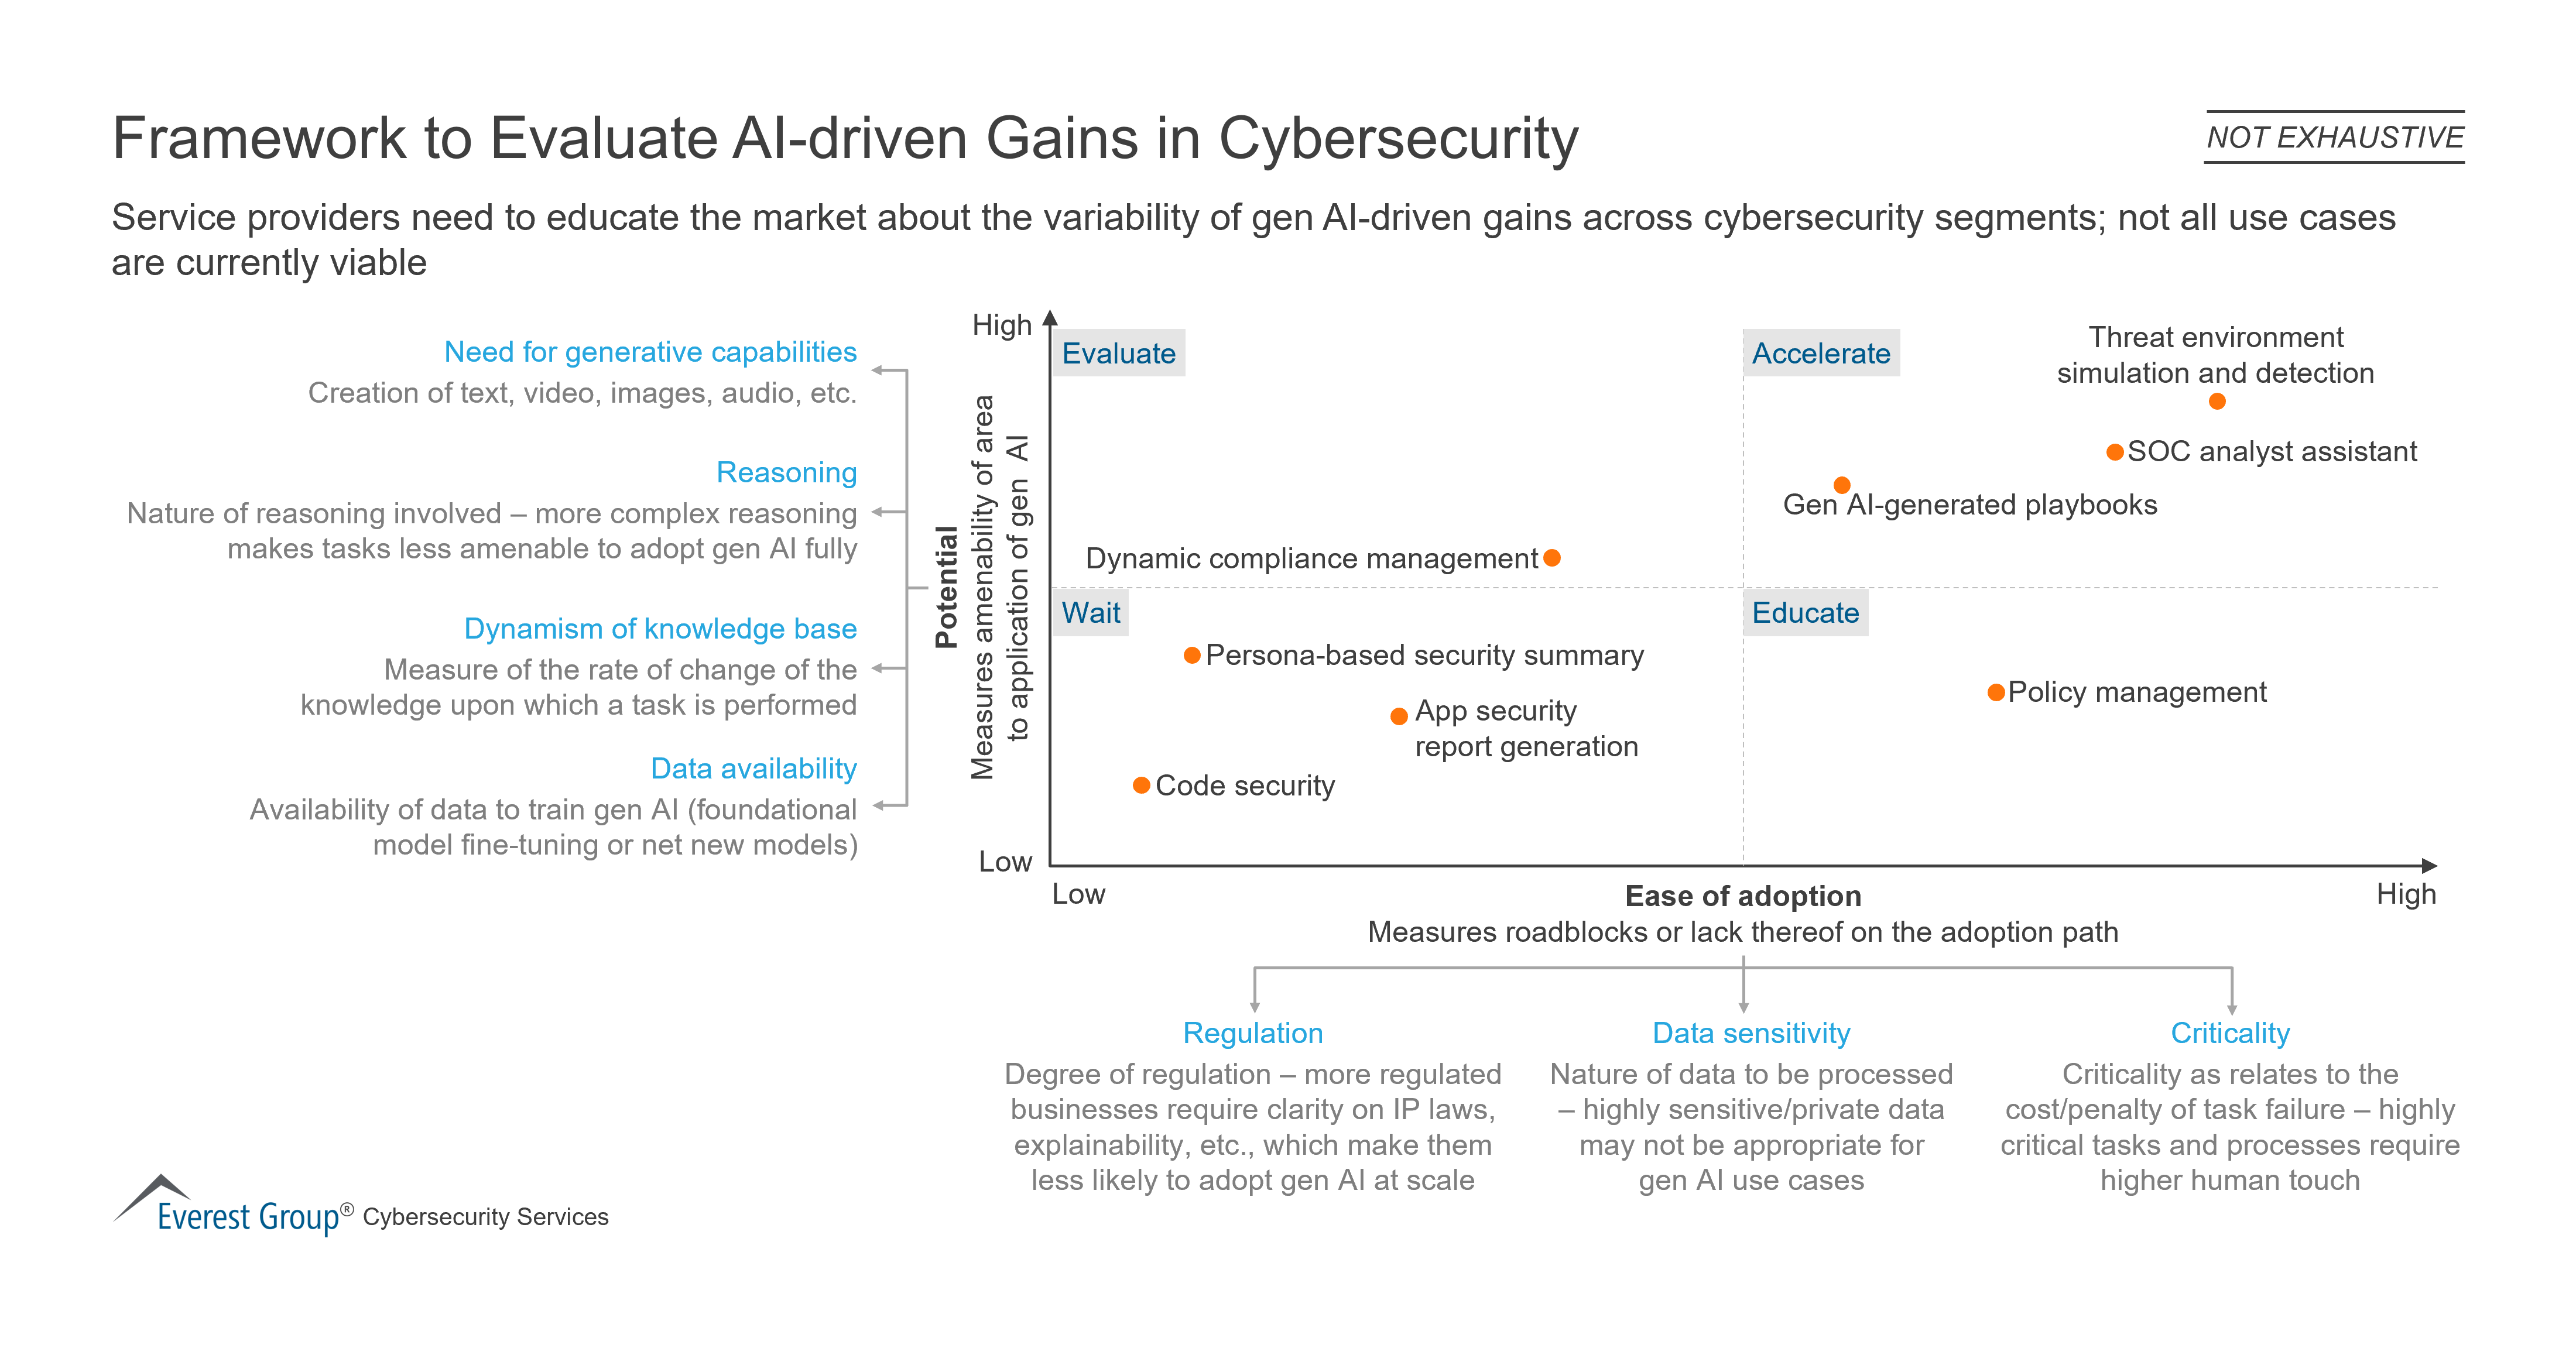 Framework to Evaluate AI-driven Gains in Cybersecurity | Market Insights™